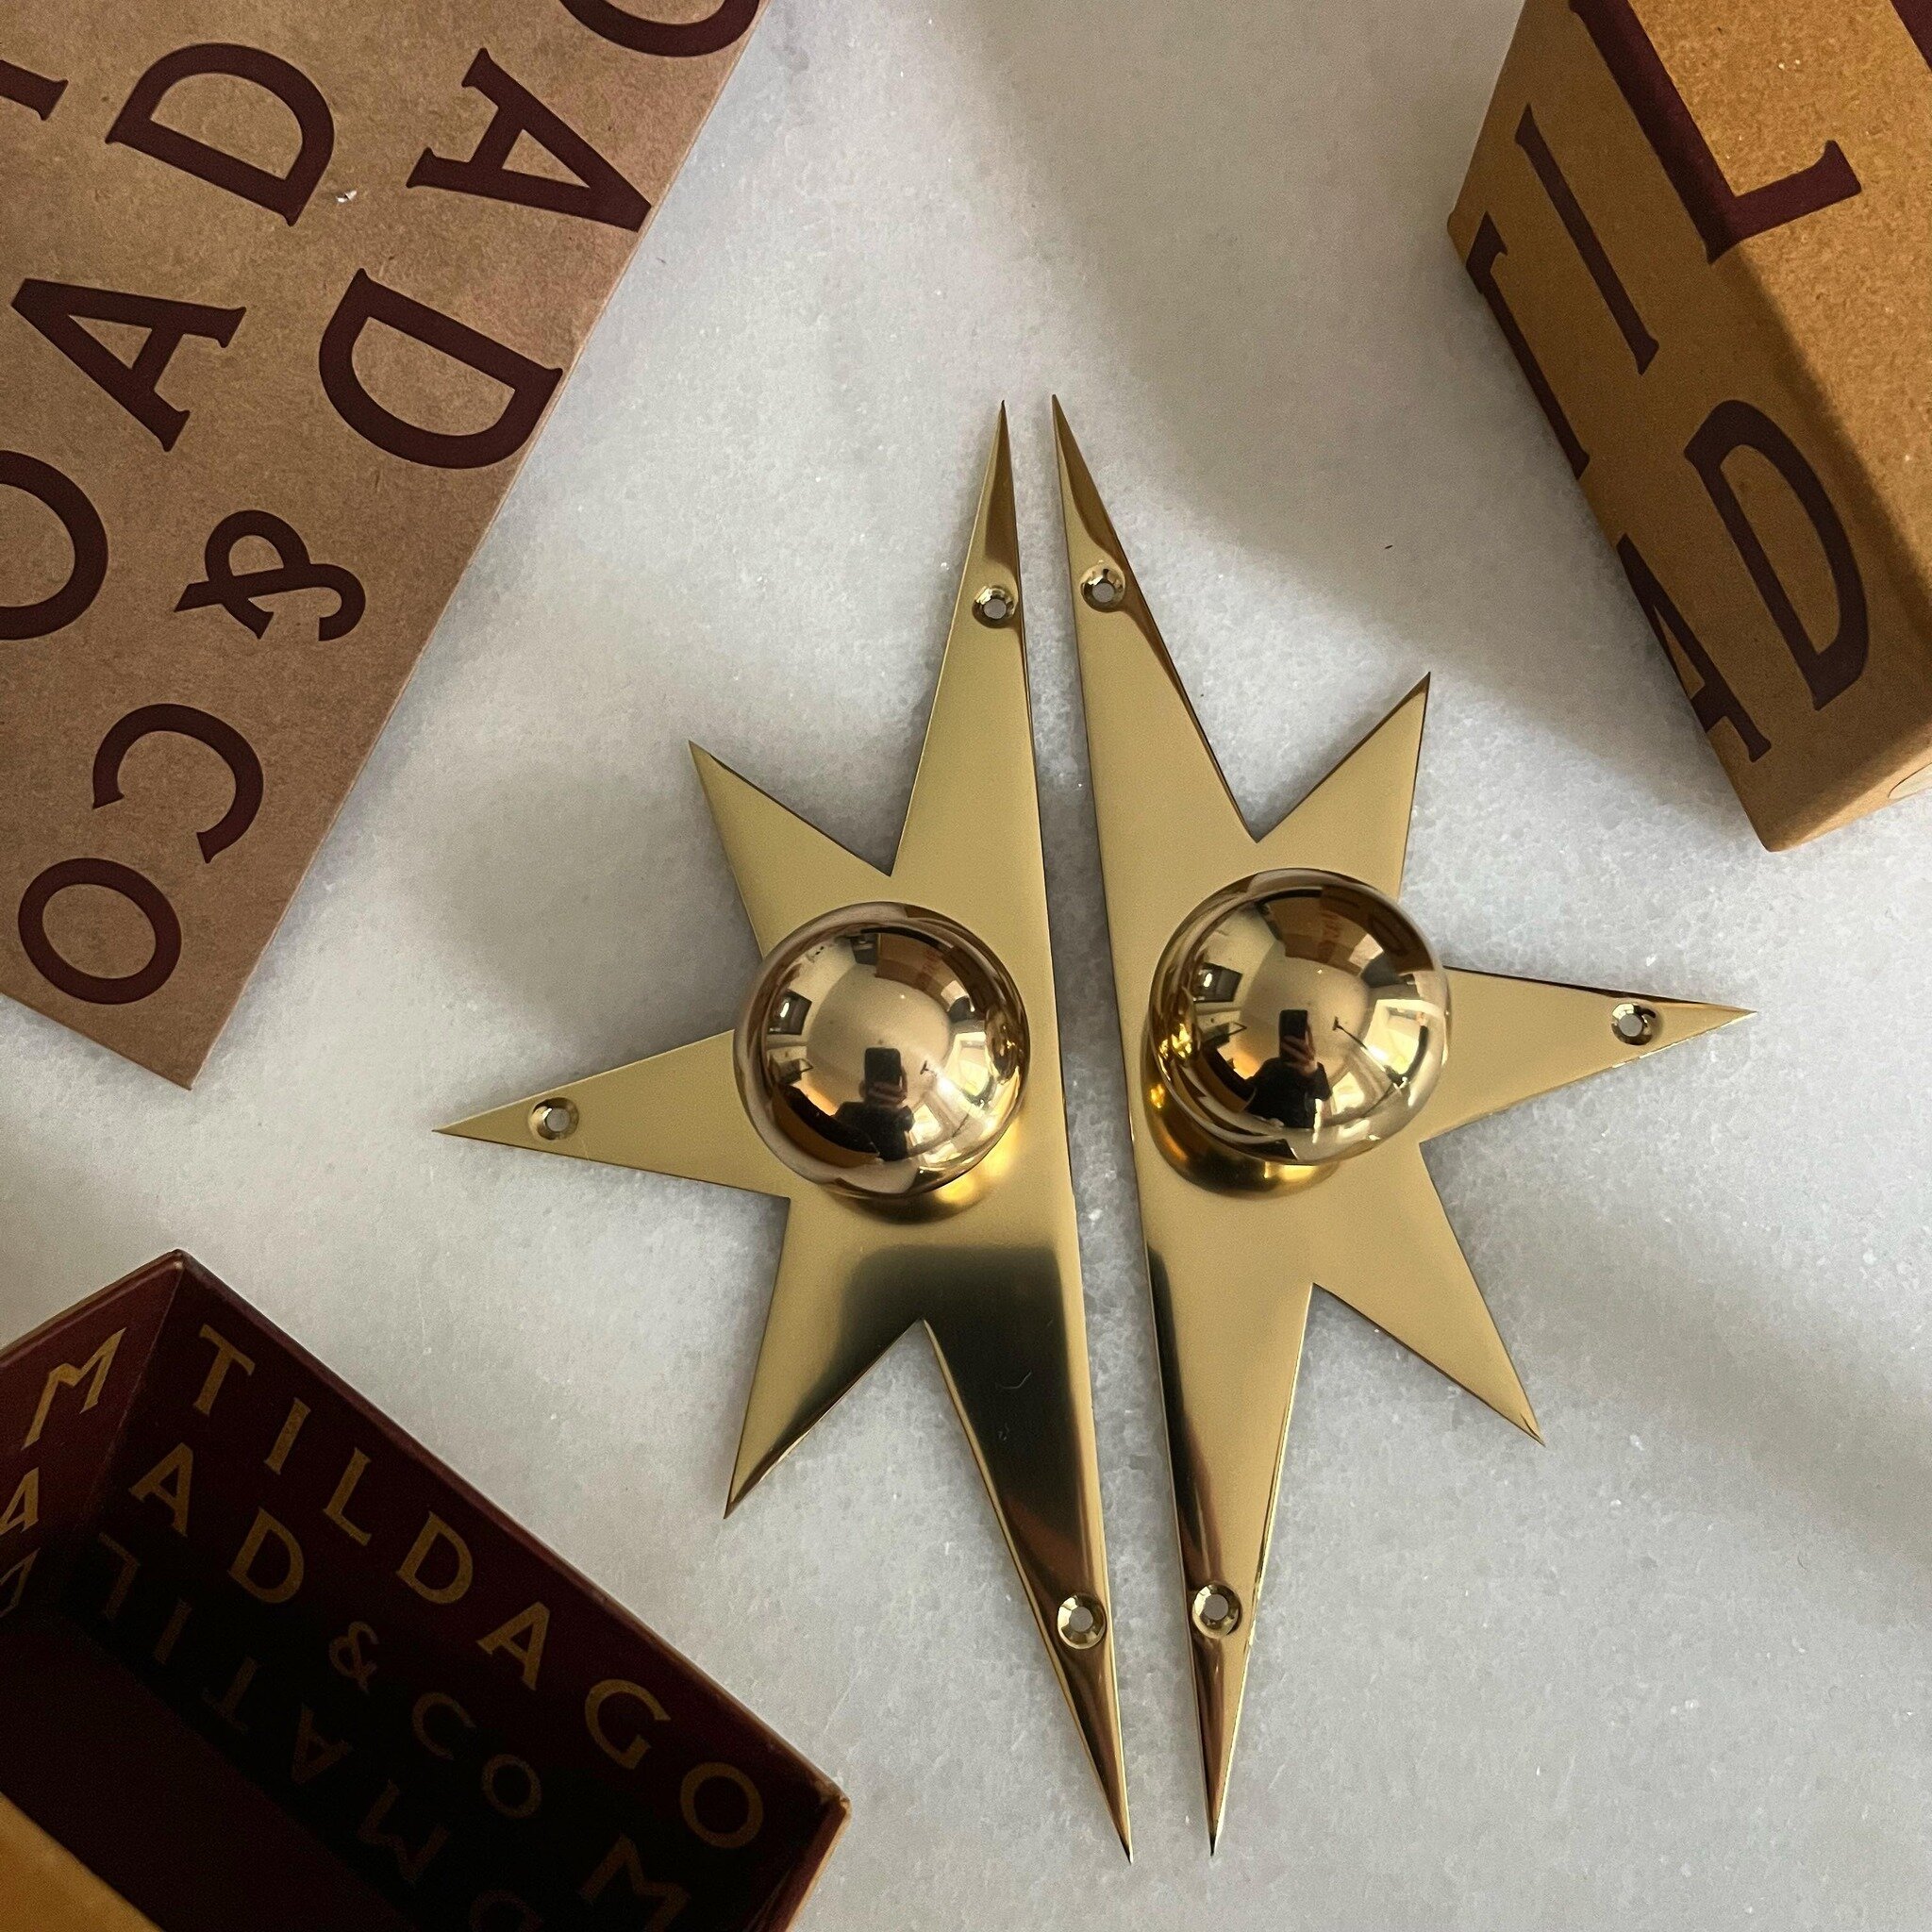 Because handles can be fun and beautiful!
We are loving these brass star backplates with brass knobs that have just arrived from @matildagoad 
They will be featured on the joinery at our Baker Street project, adding a playful element.

#hardware #sta